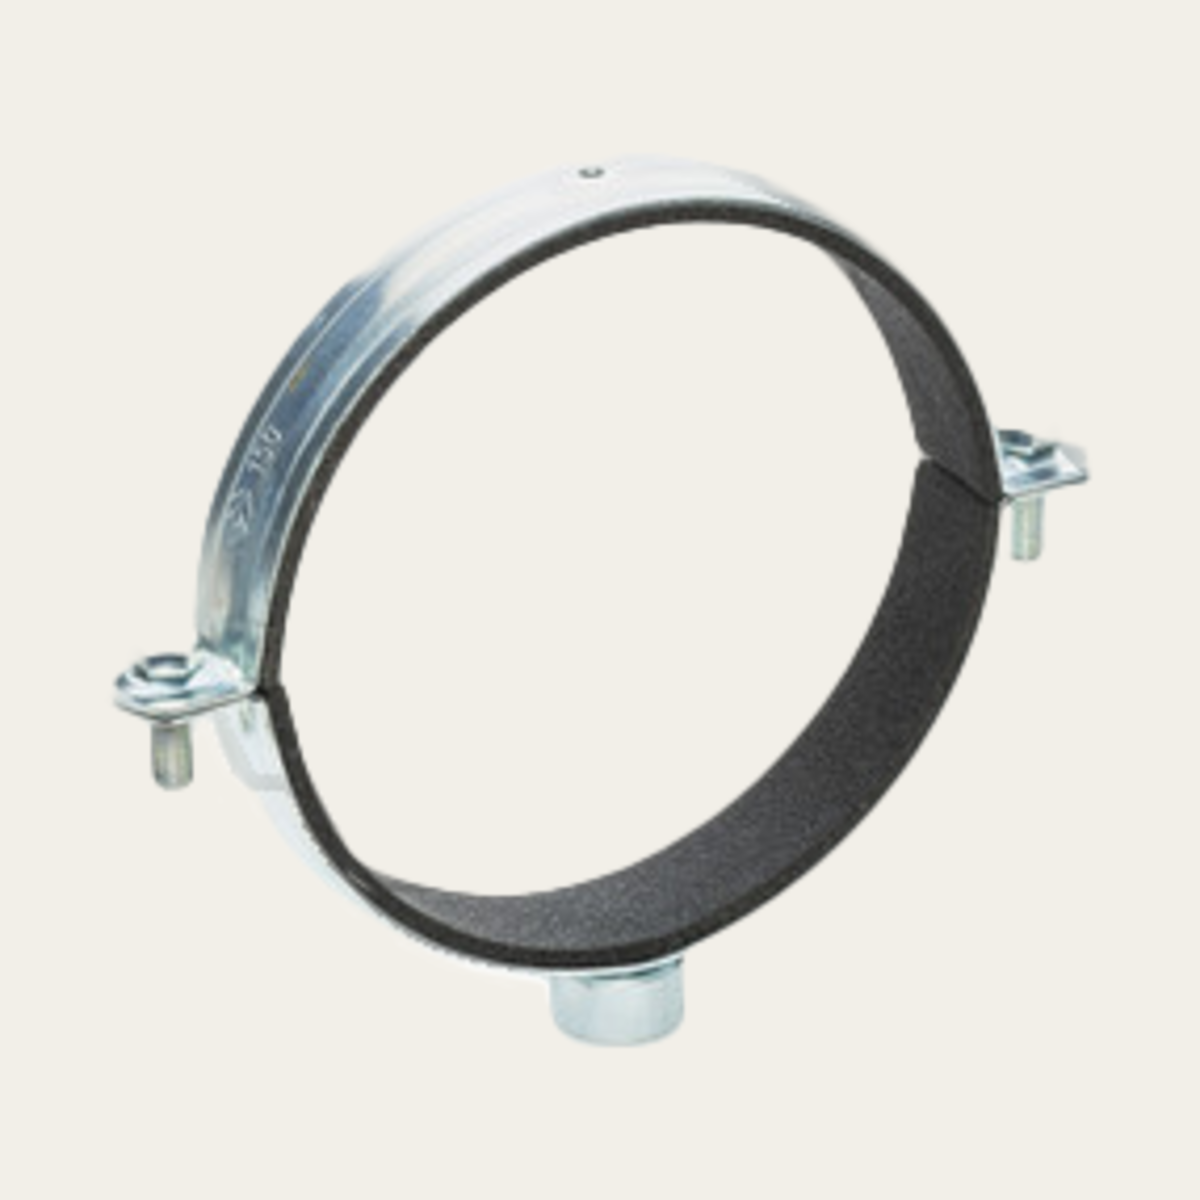 ø150 mm pipe clamp with sound absorption lining